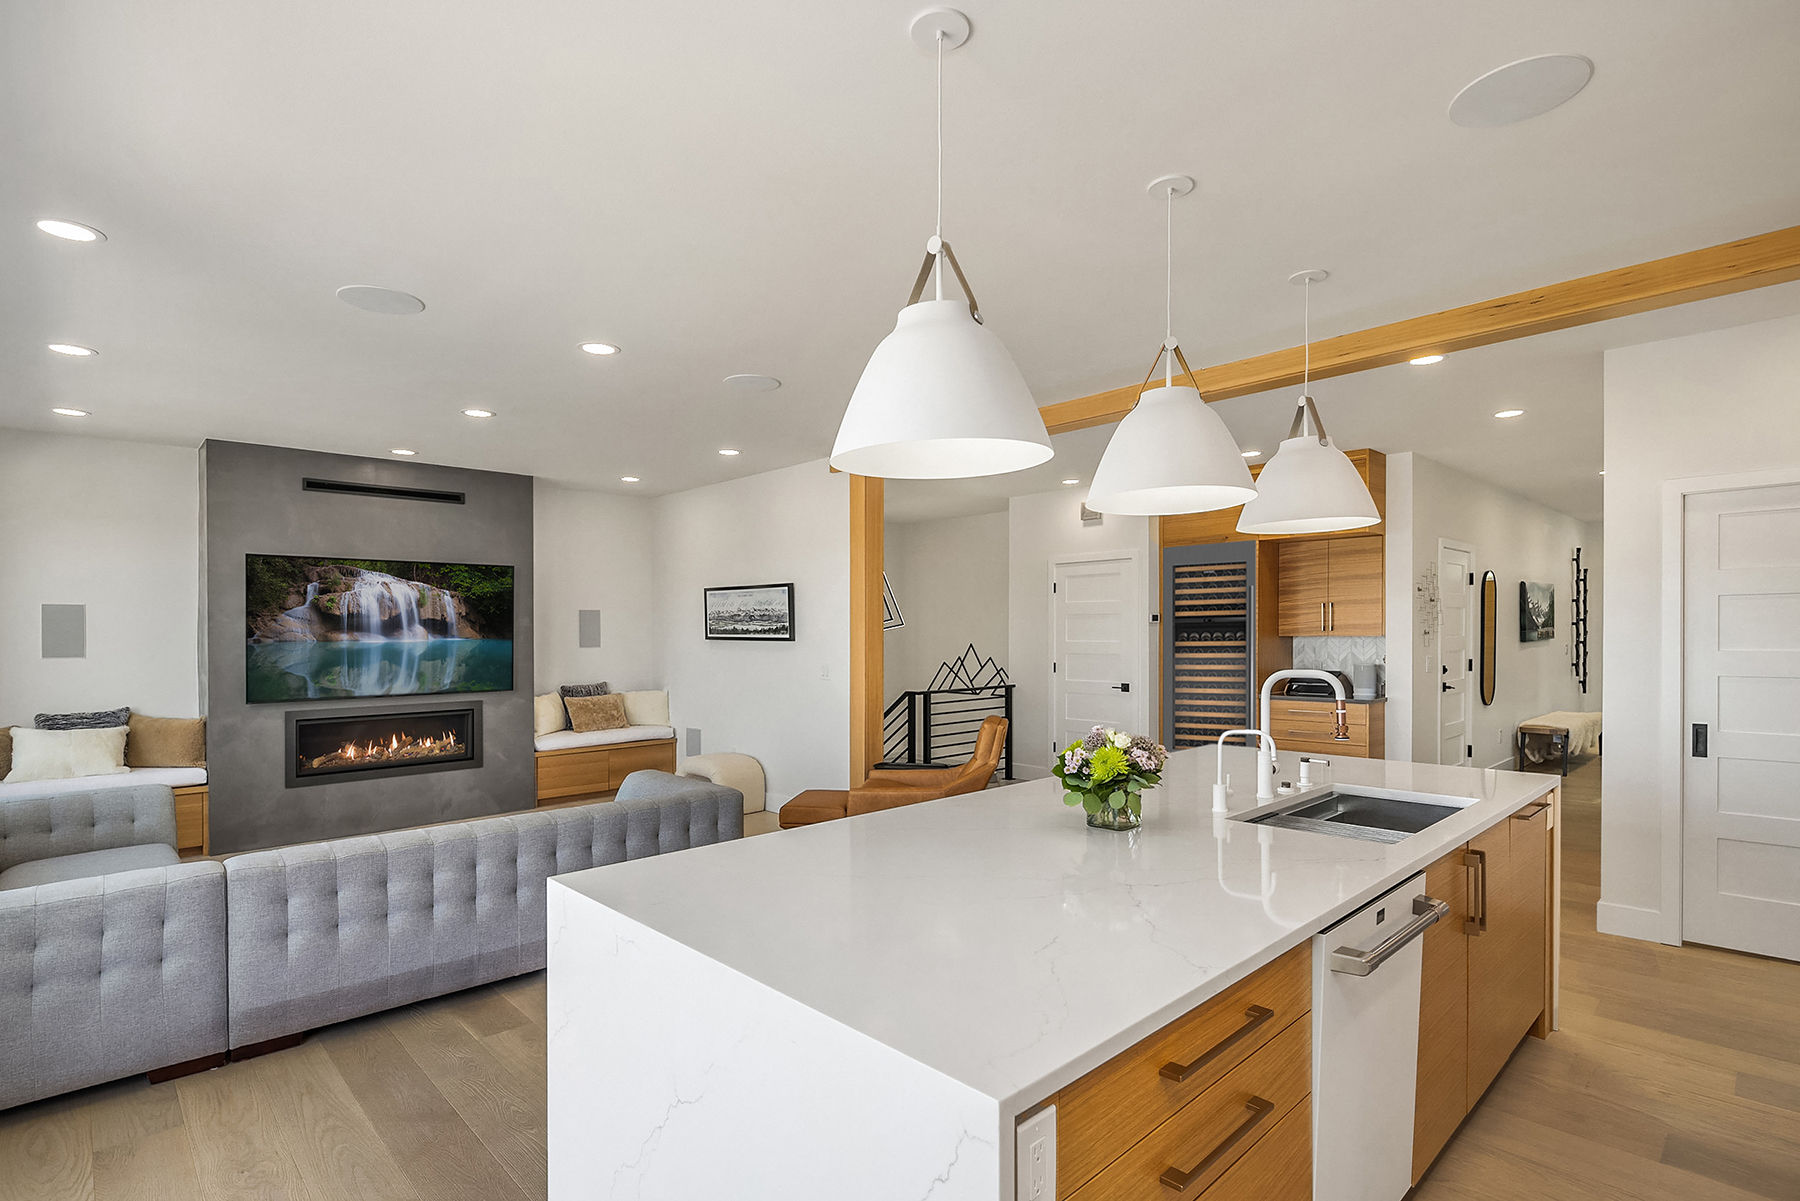 Slosson Project – Issaquah Kitchen Remodel 4